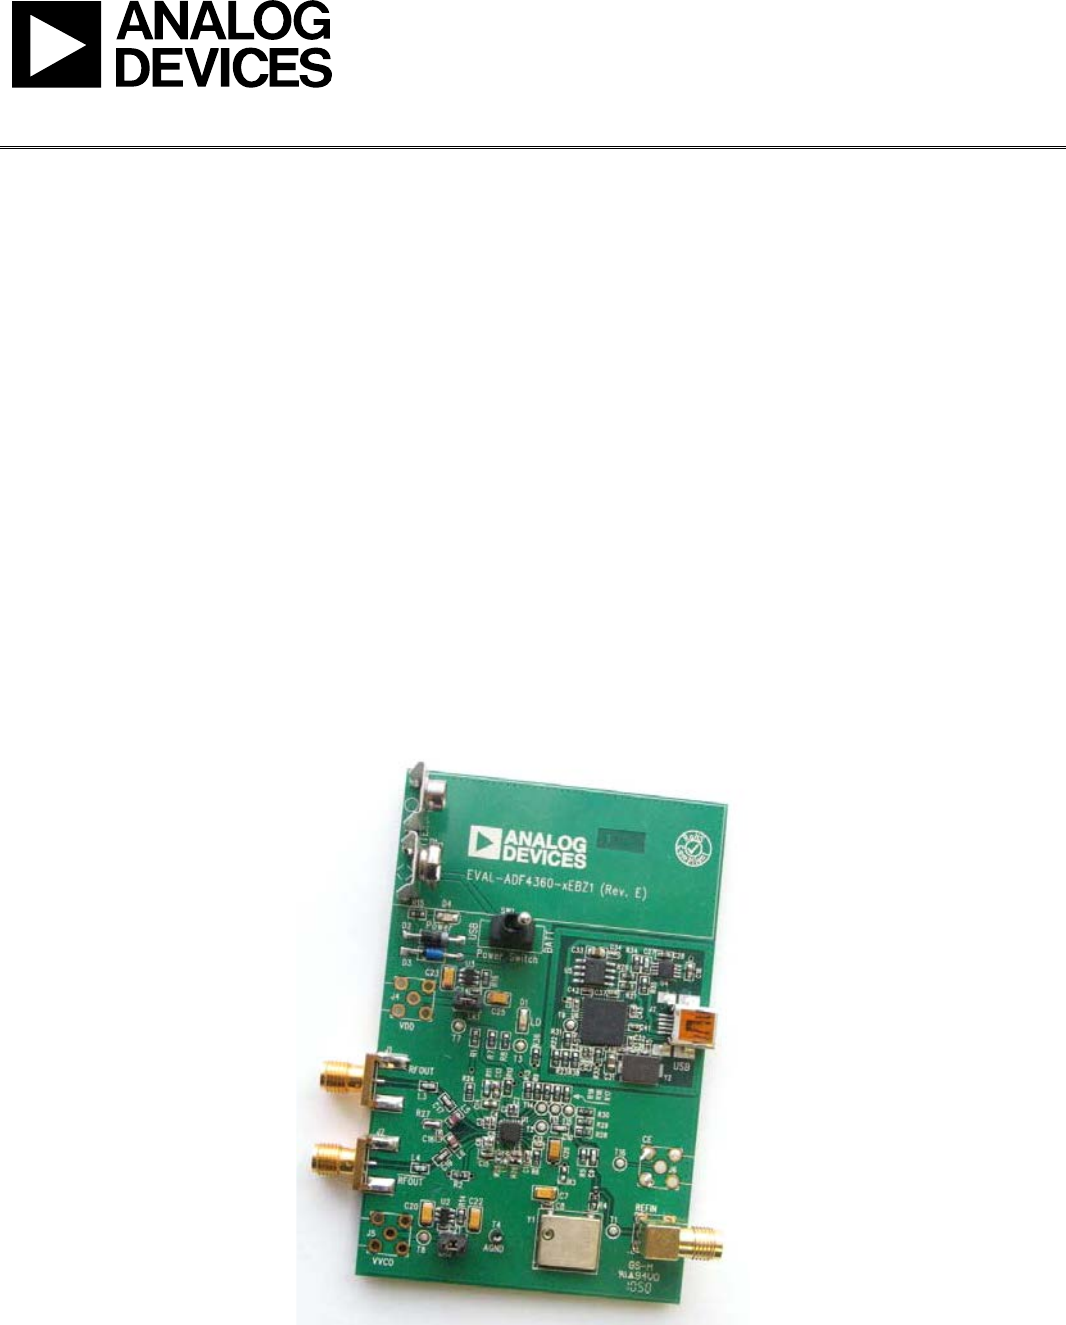 Analog devices rfg.l eval board driver download for windows 8